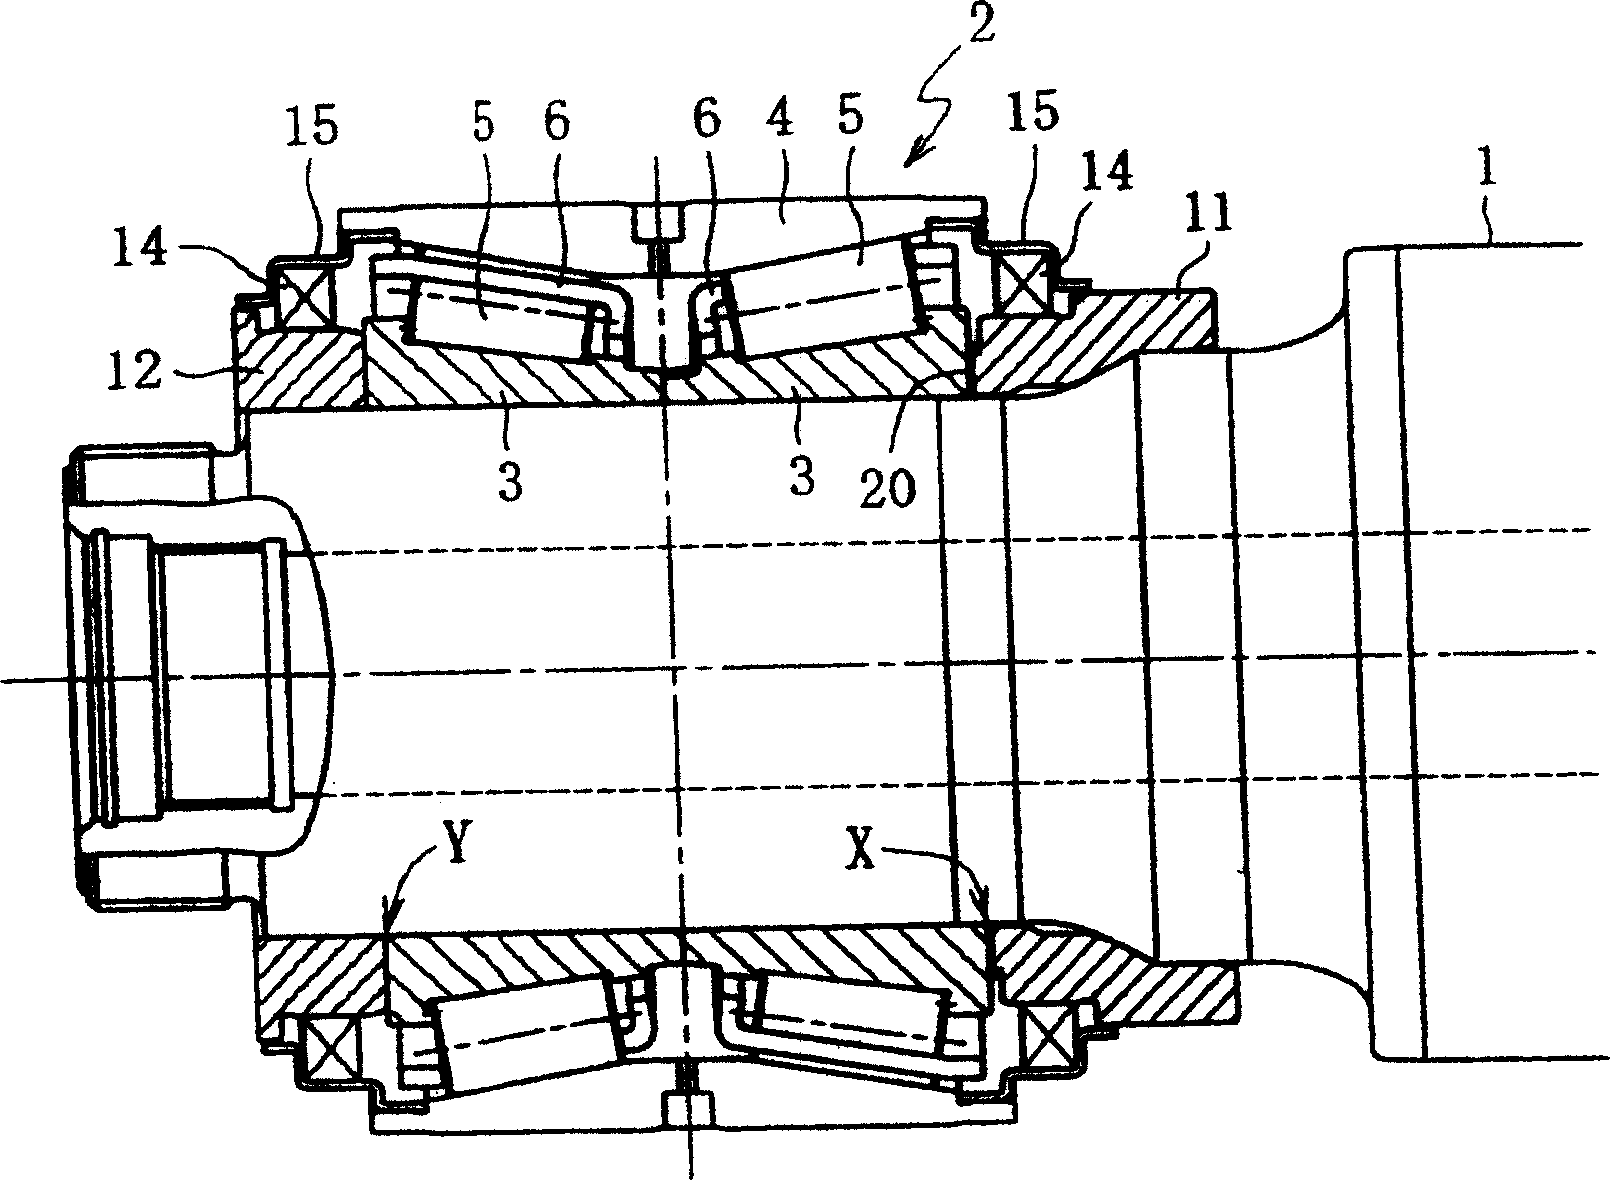 Bearing device for rolling stock axle